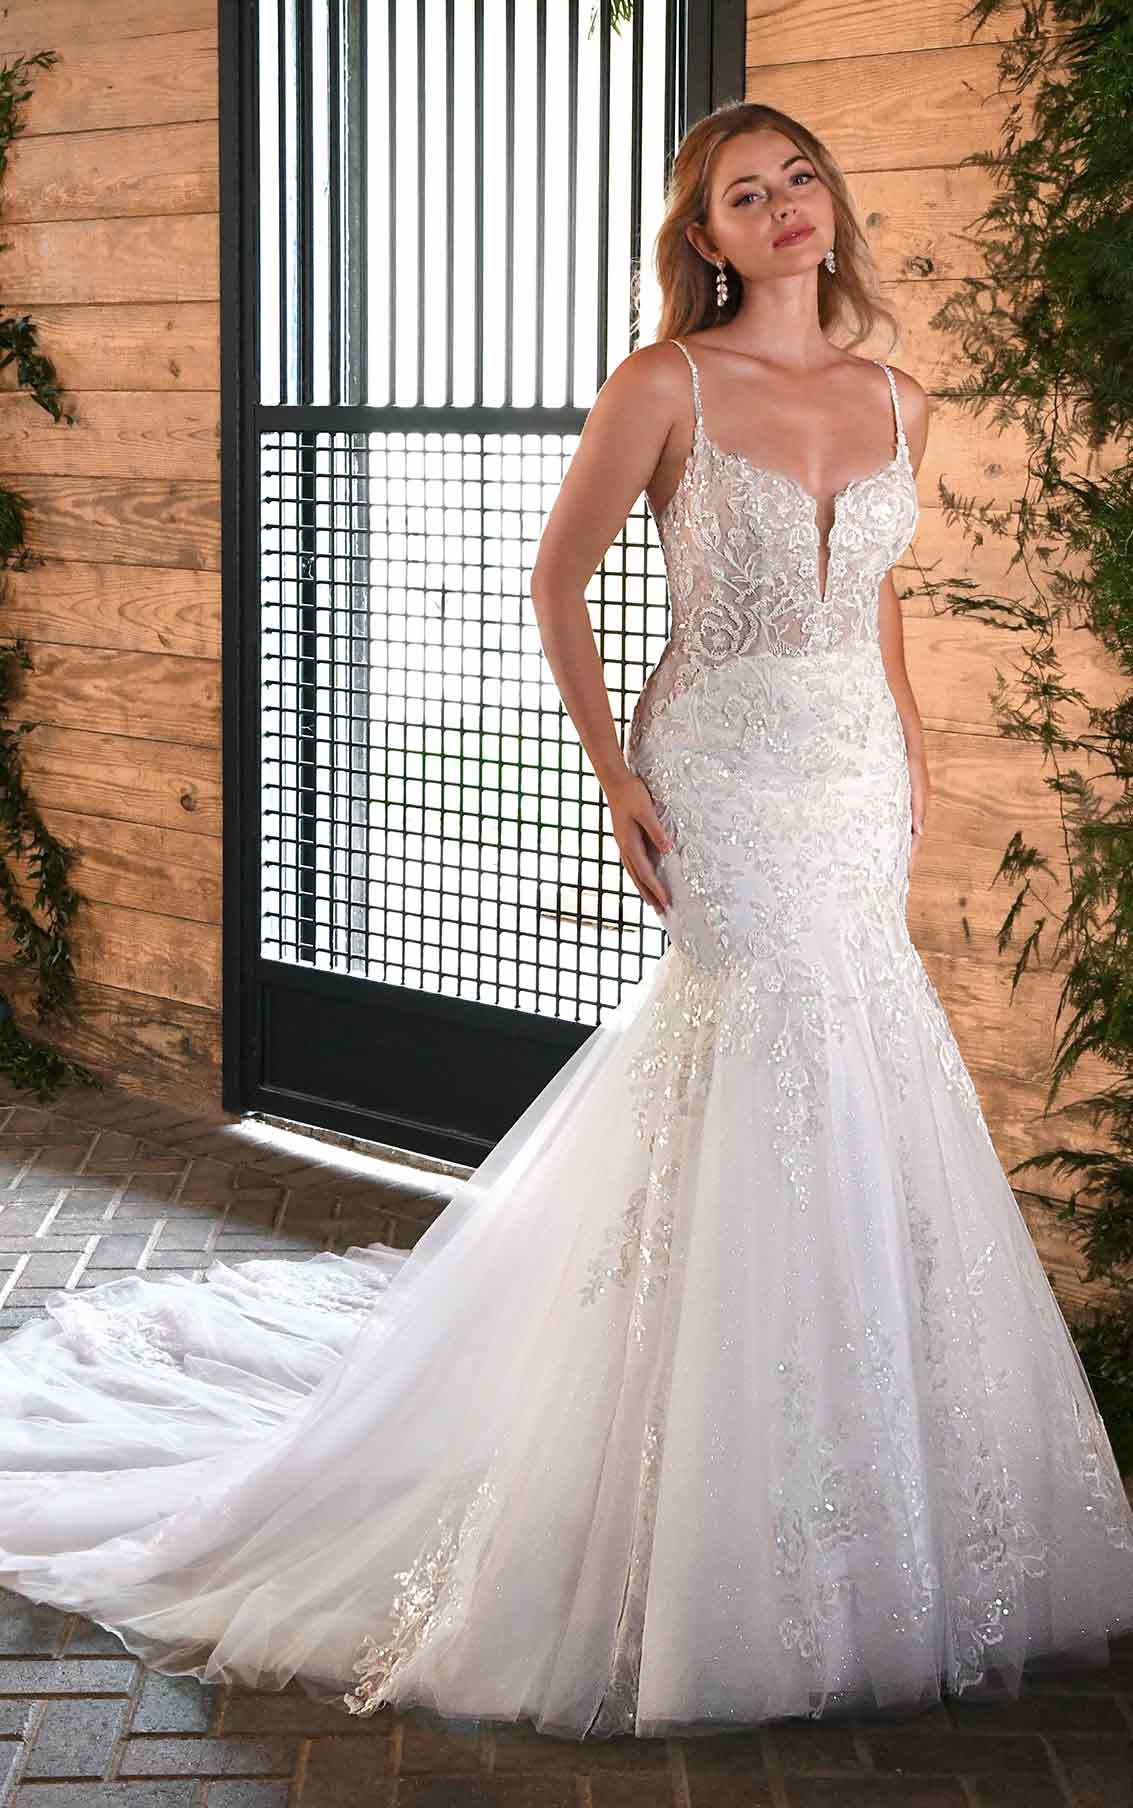 SPARKLING FLORAL LACE WEDDING DRESS WITH PLUNGING NECKLINE AND BACK DETAIL  | Kleinfeld Bridal